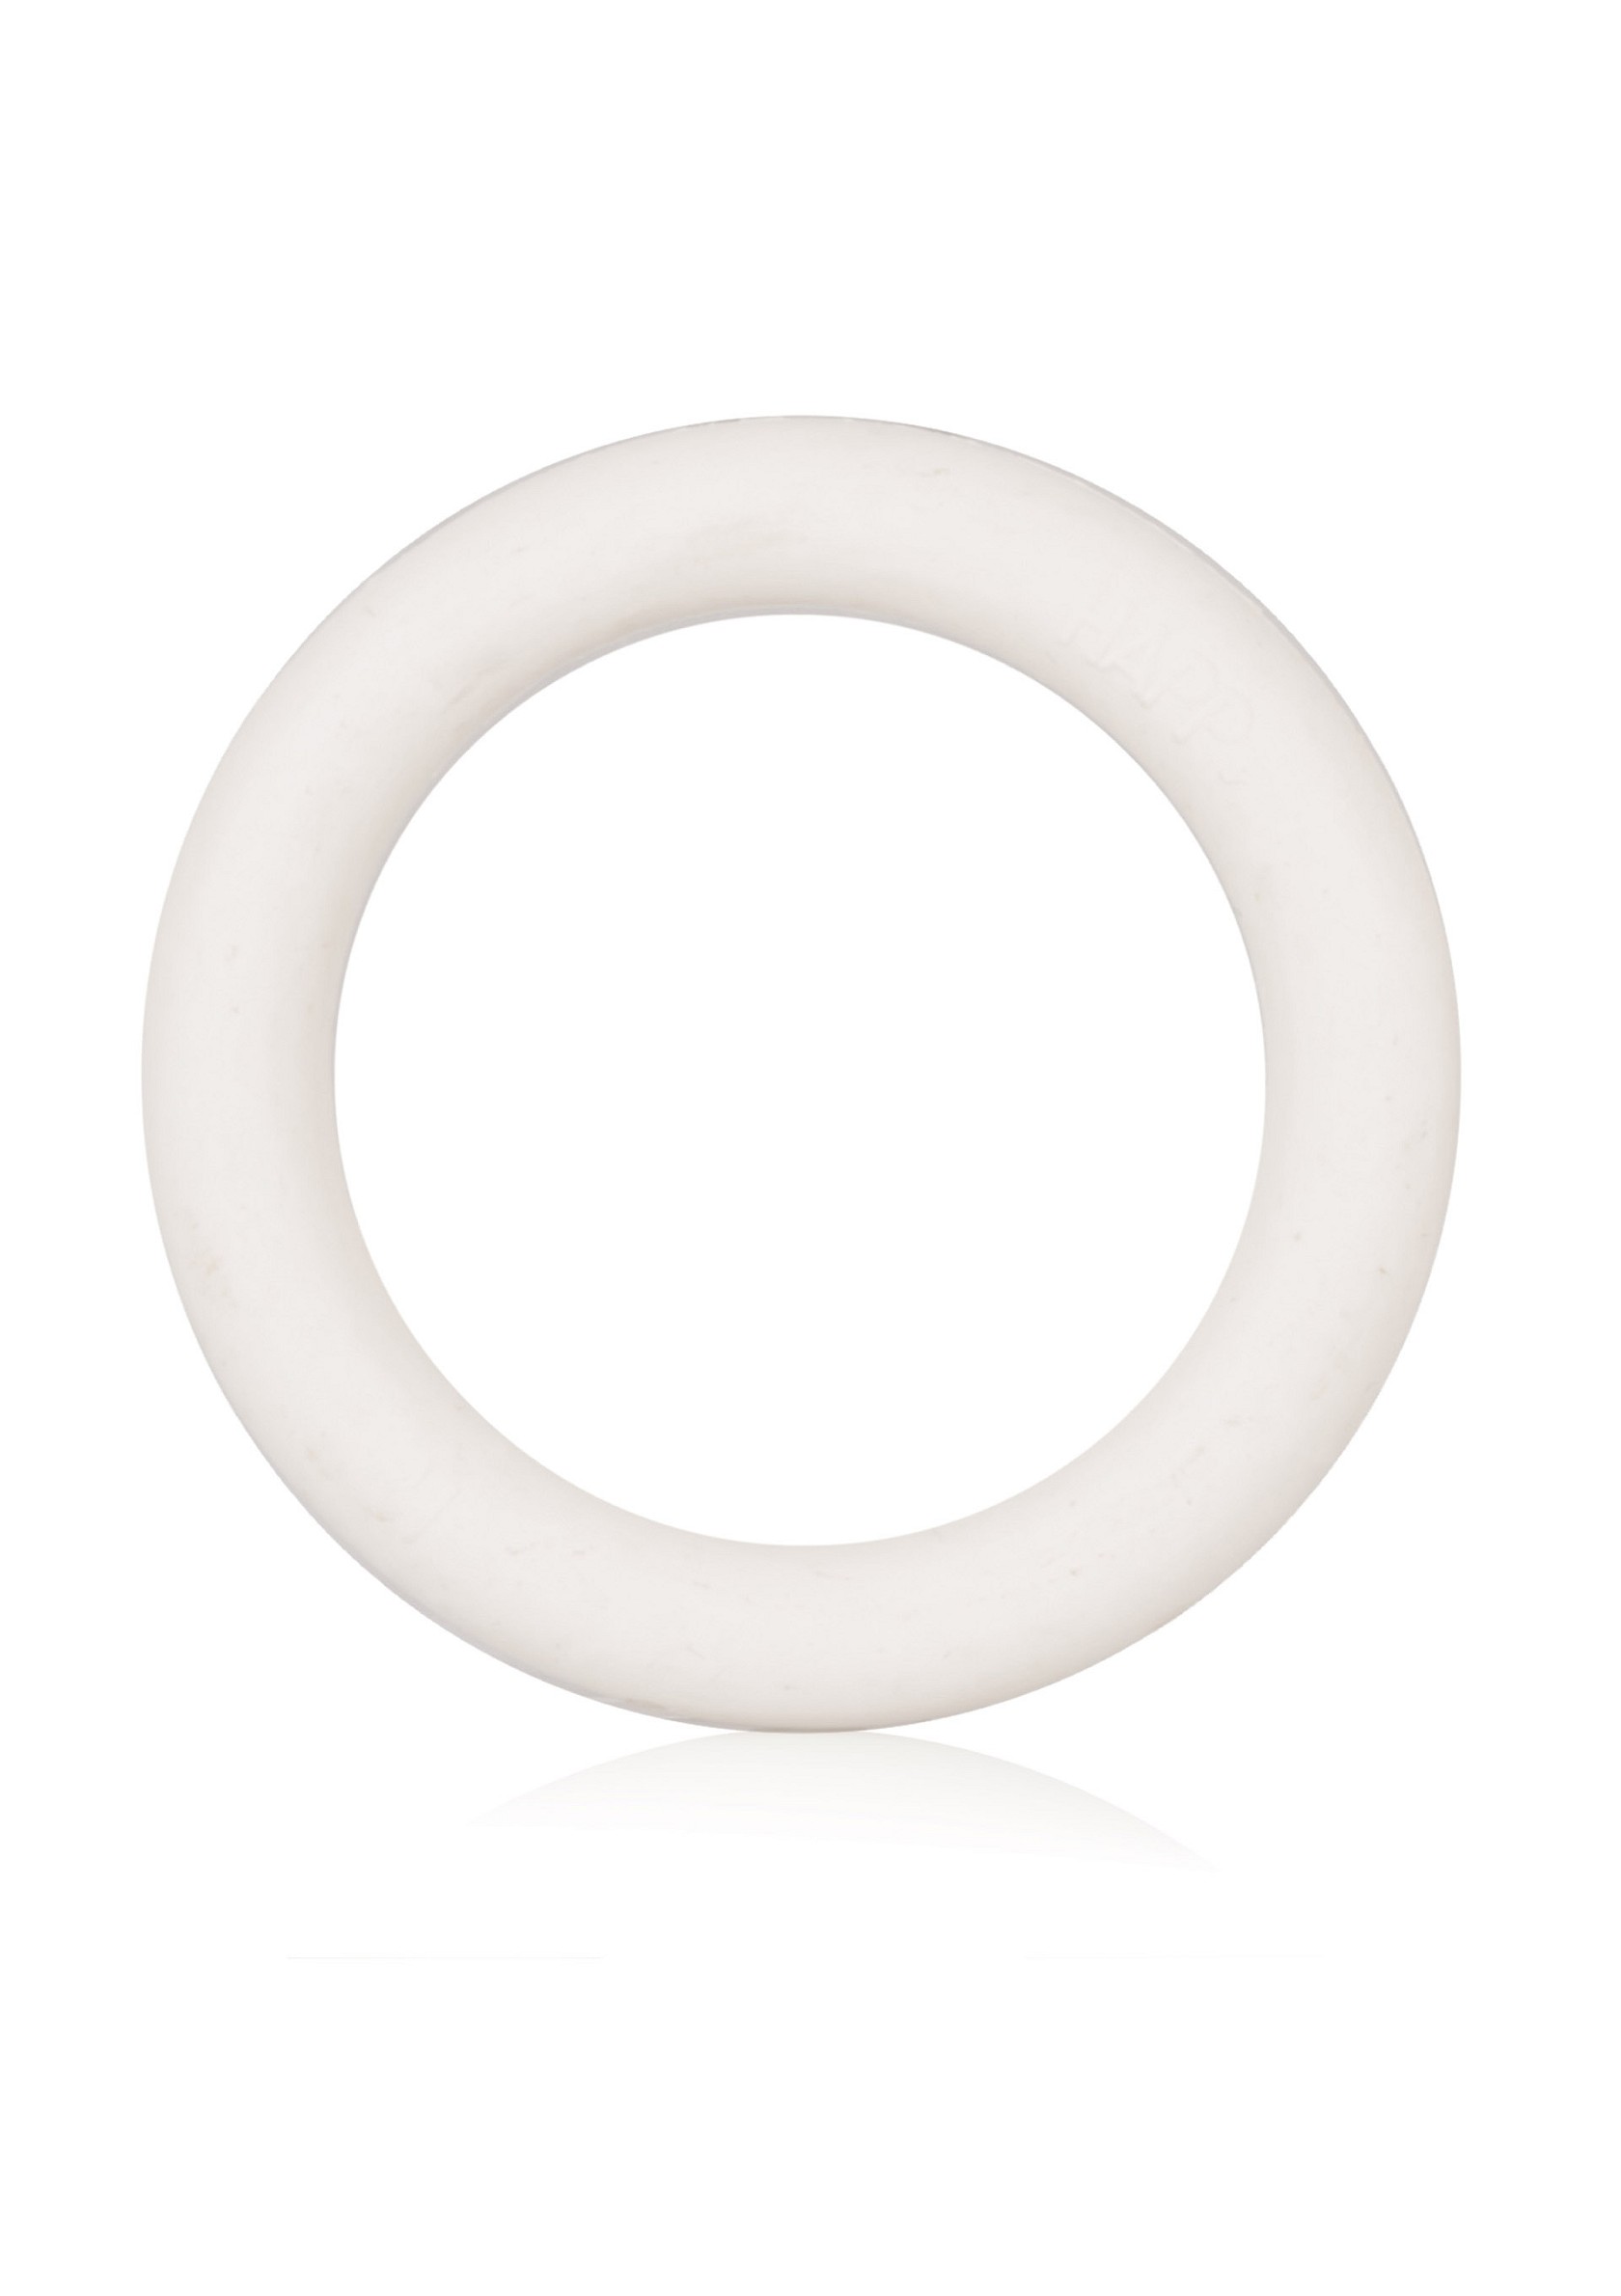 Rubber Ring - Small